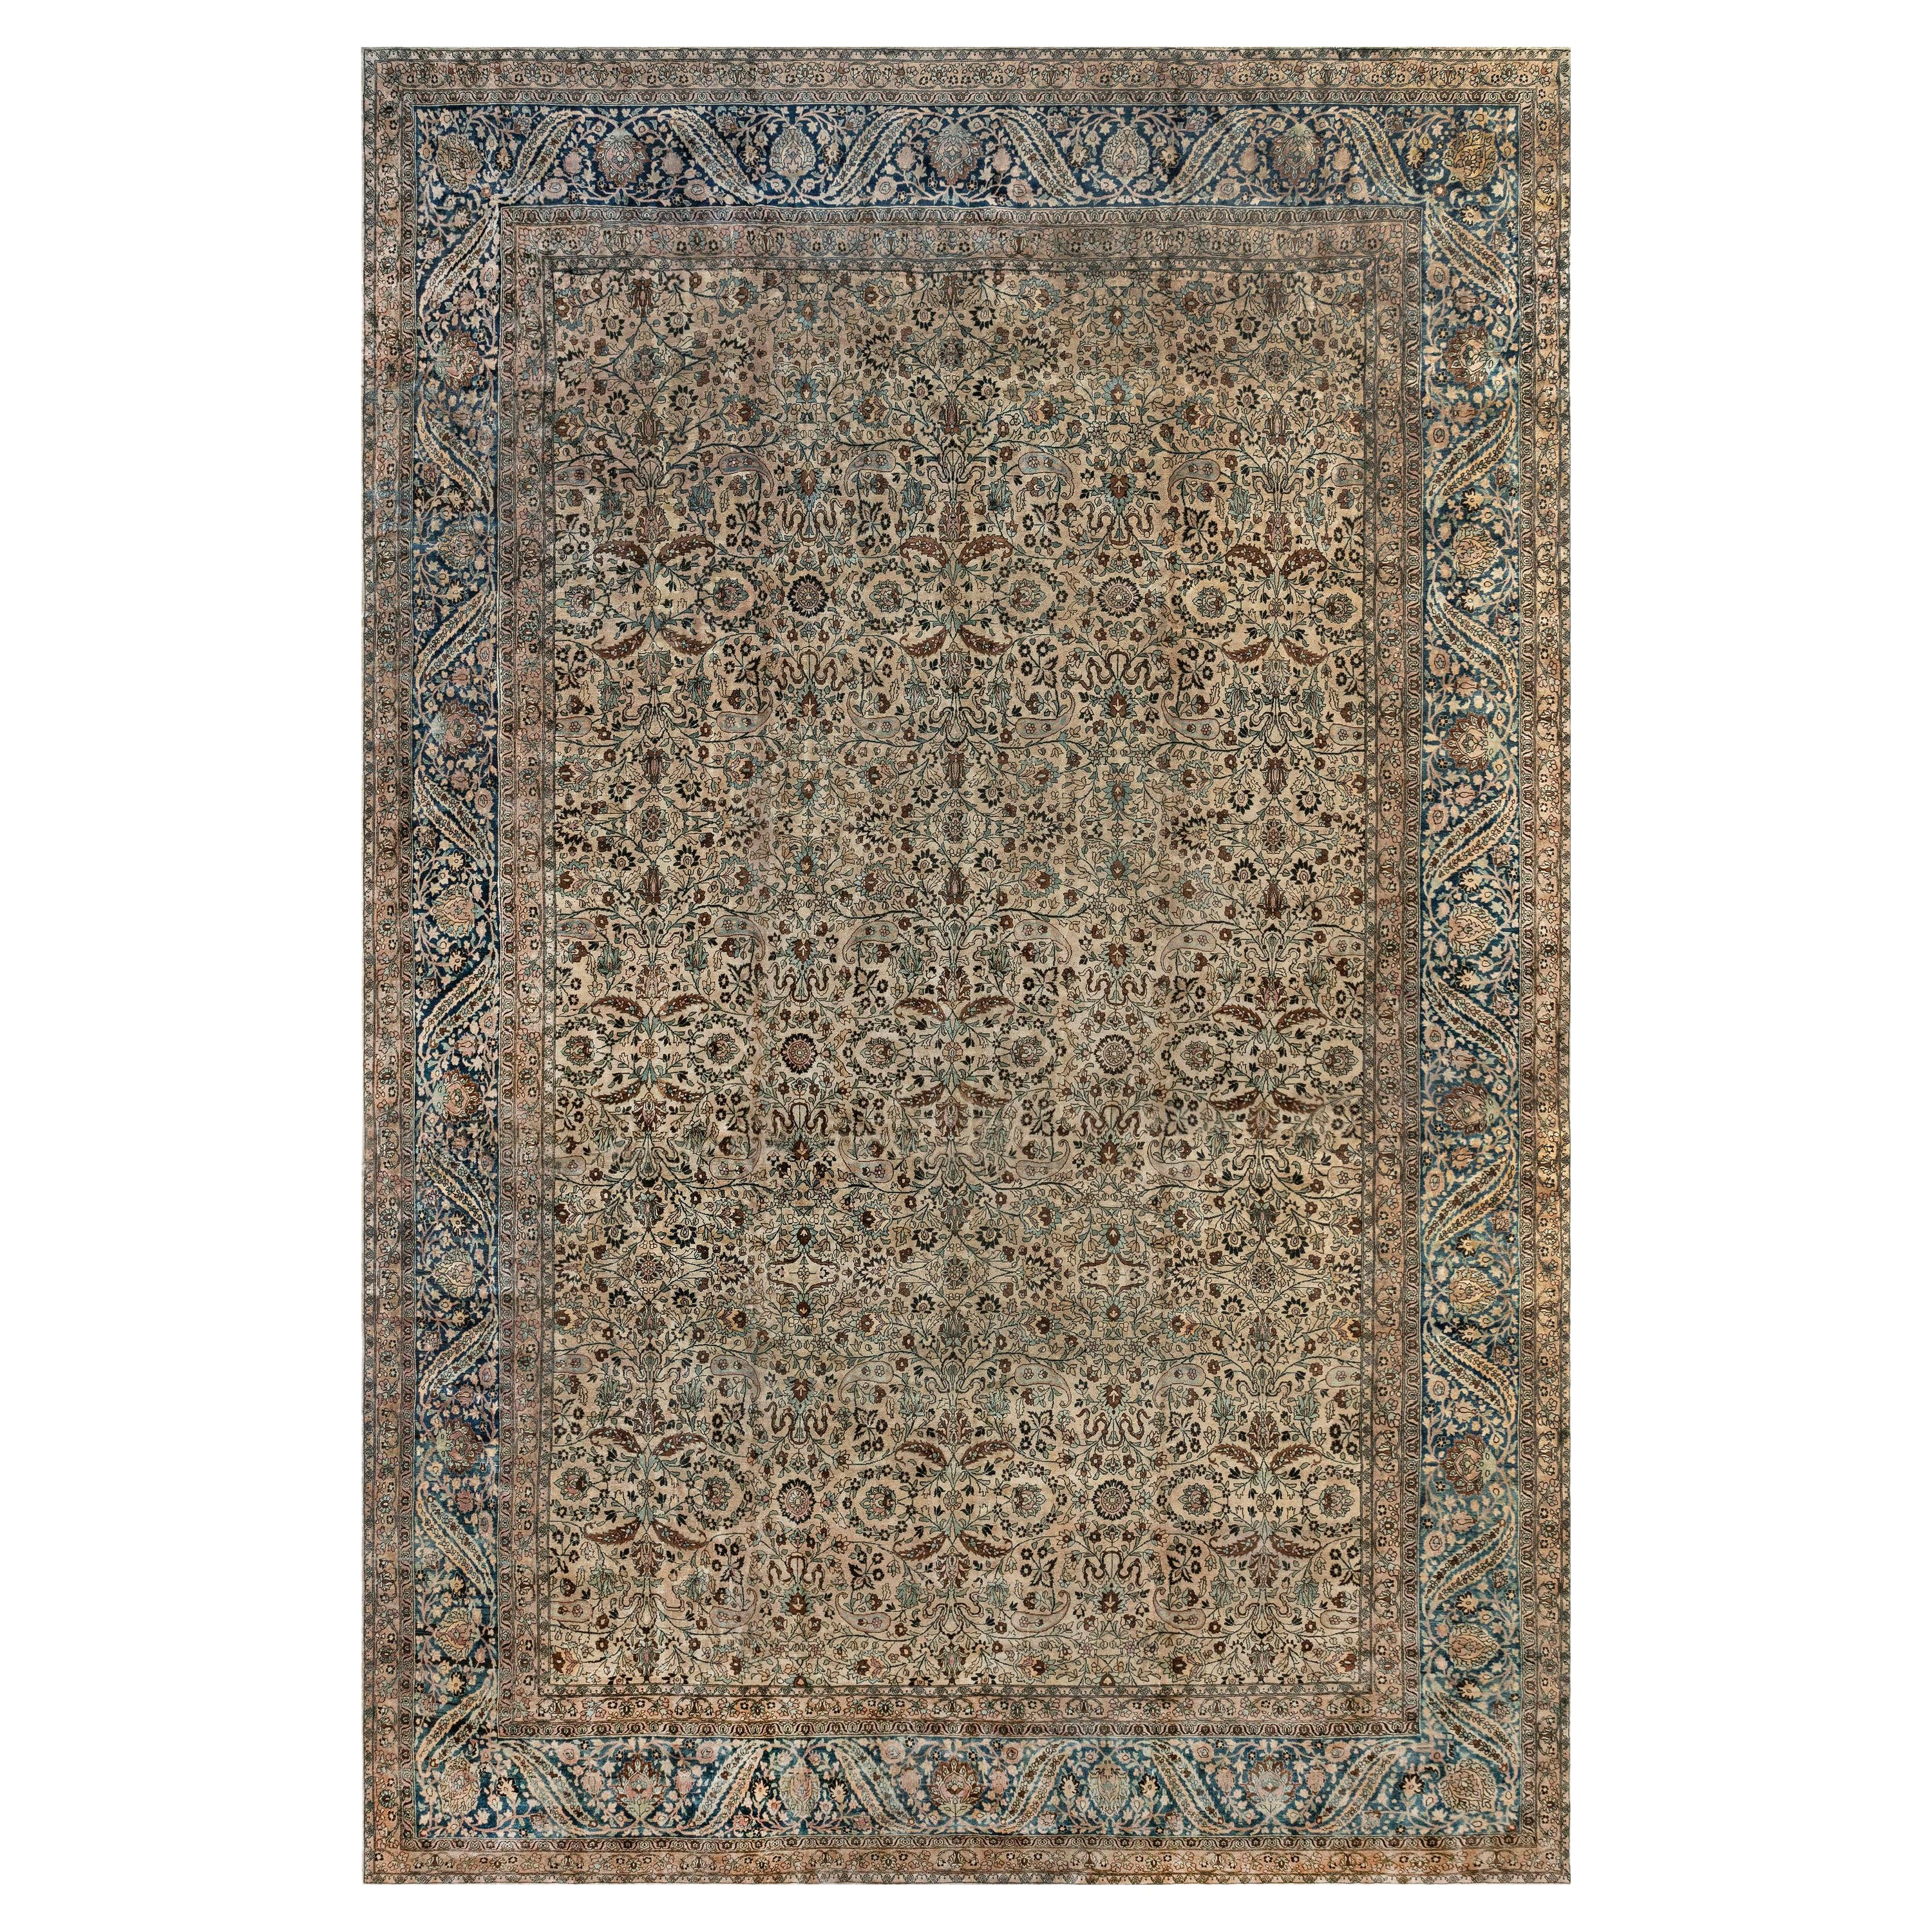 Oversized Antique Persian Kirman Rug Size Adjusted For Sale